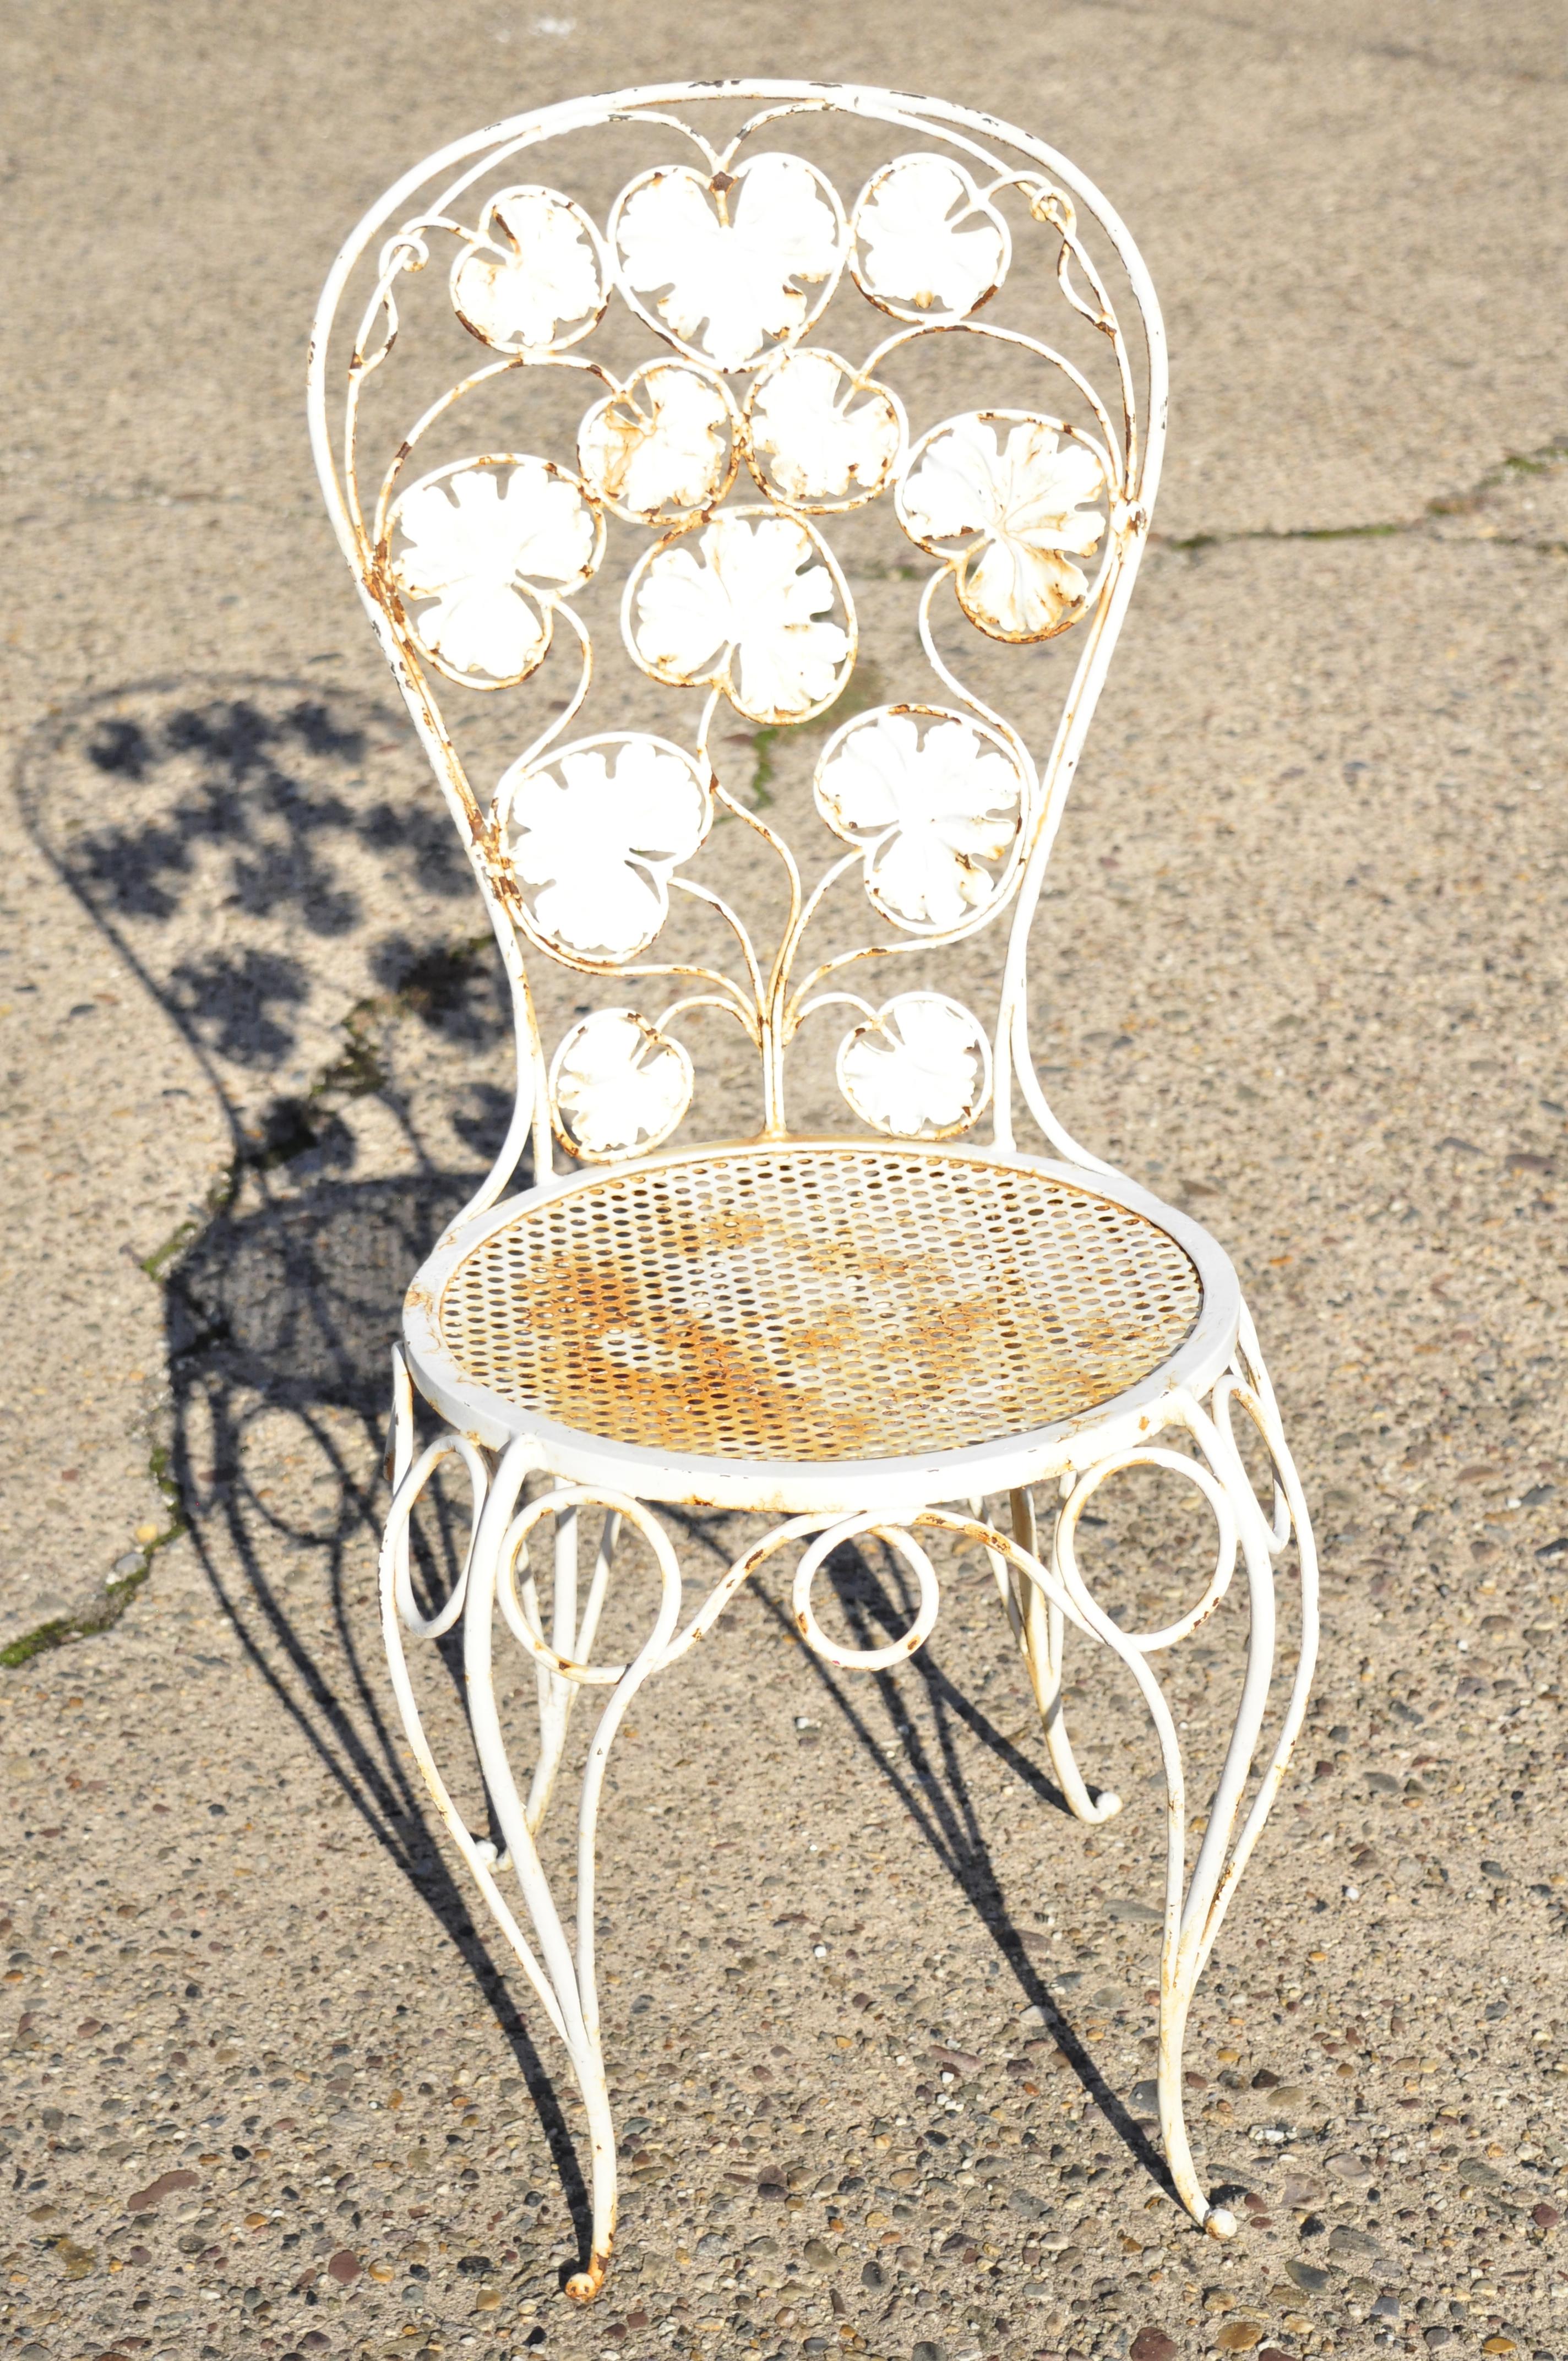 Antique French Art Nouveau flower maple leaf wrought iron garden chairs - a pair. Item features (2) side chairs, maple leaf backs, round perforated mesh seats, wrought iron construction, very nice antique item, great style and form, circa early